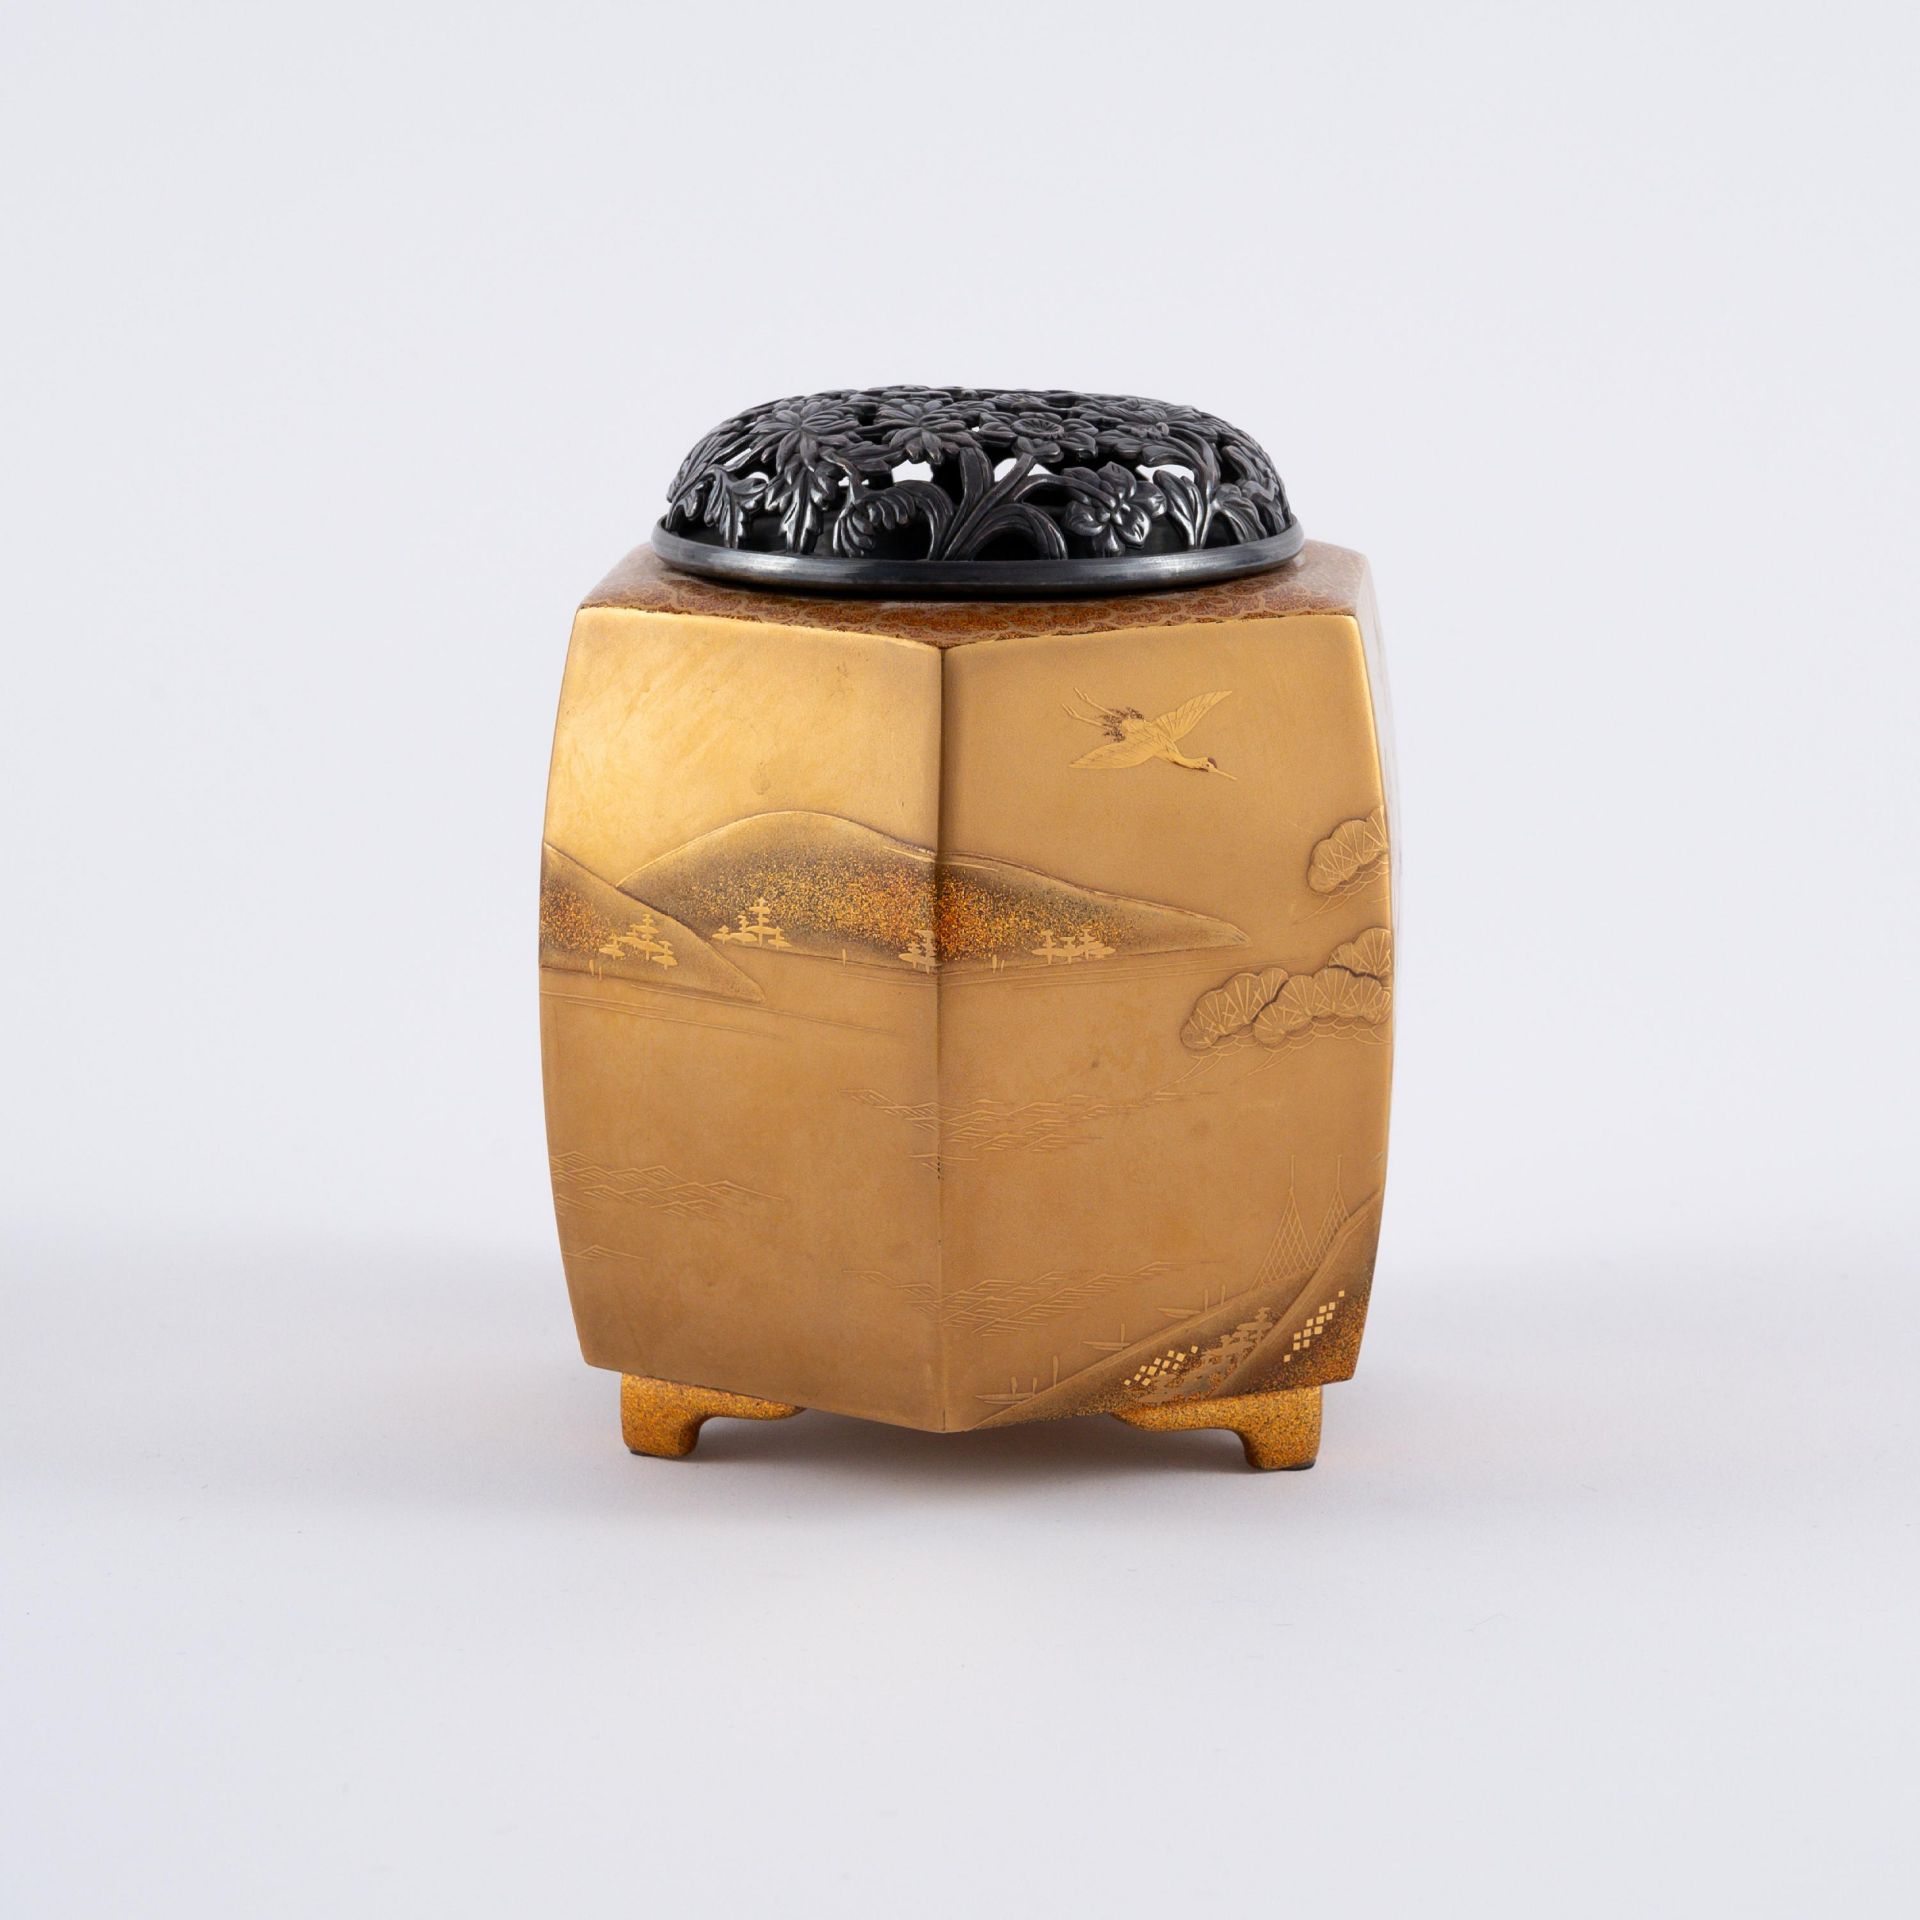 GOLD AND SILVER POT POURRI VESSEL WITH LAKE SCENERY AND PINE - Image 3 of 6